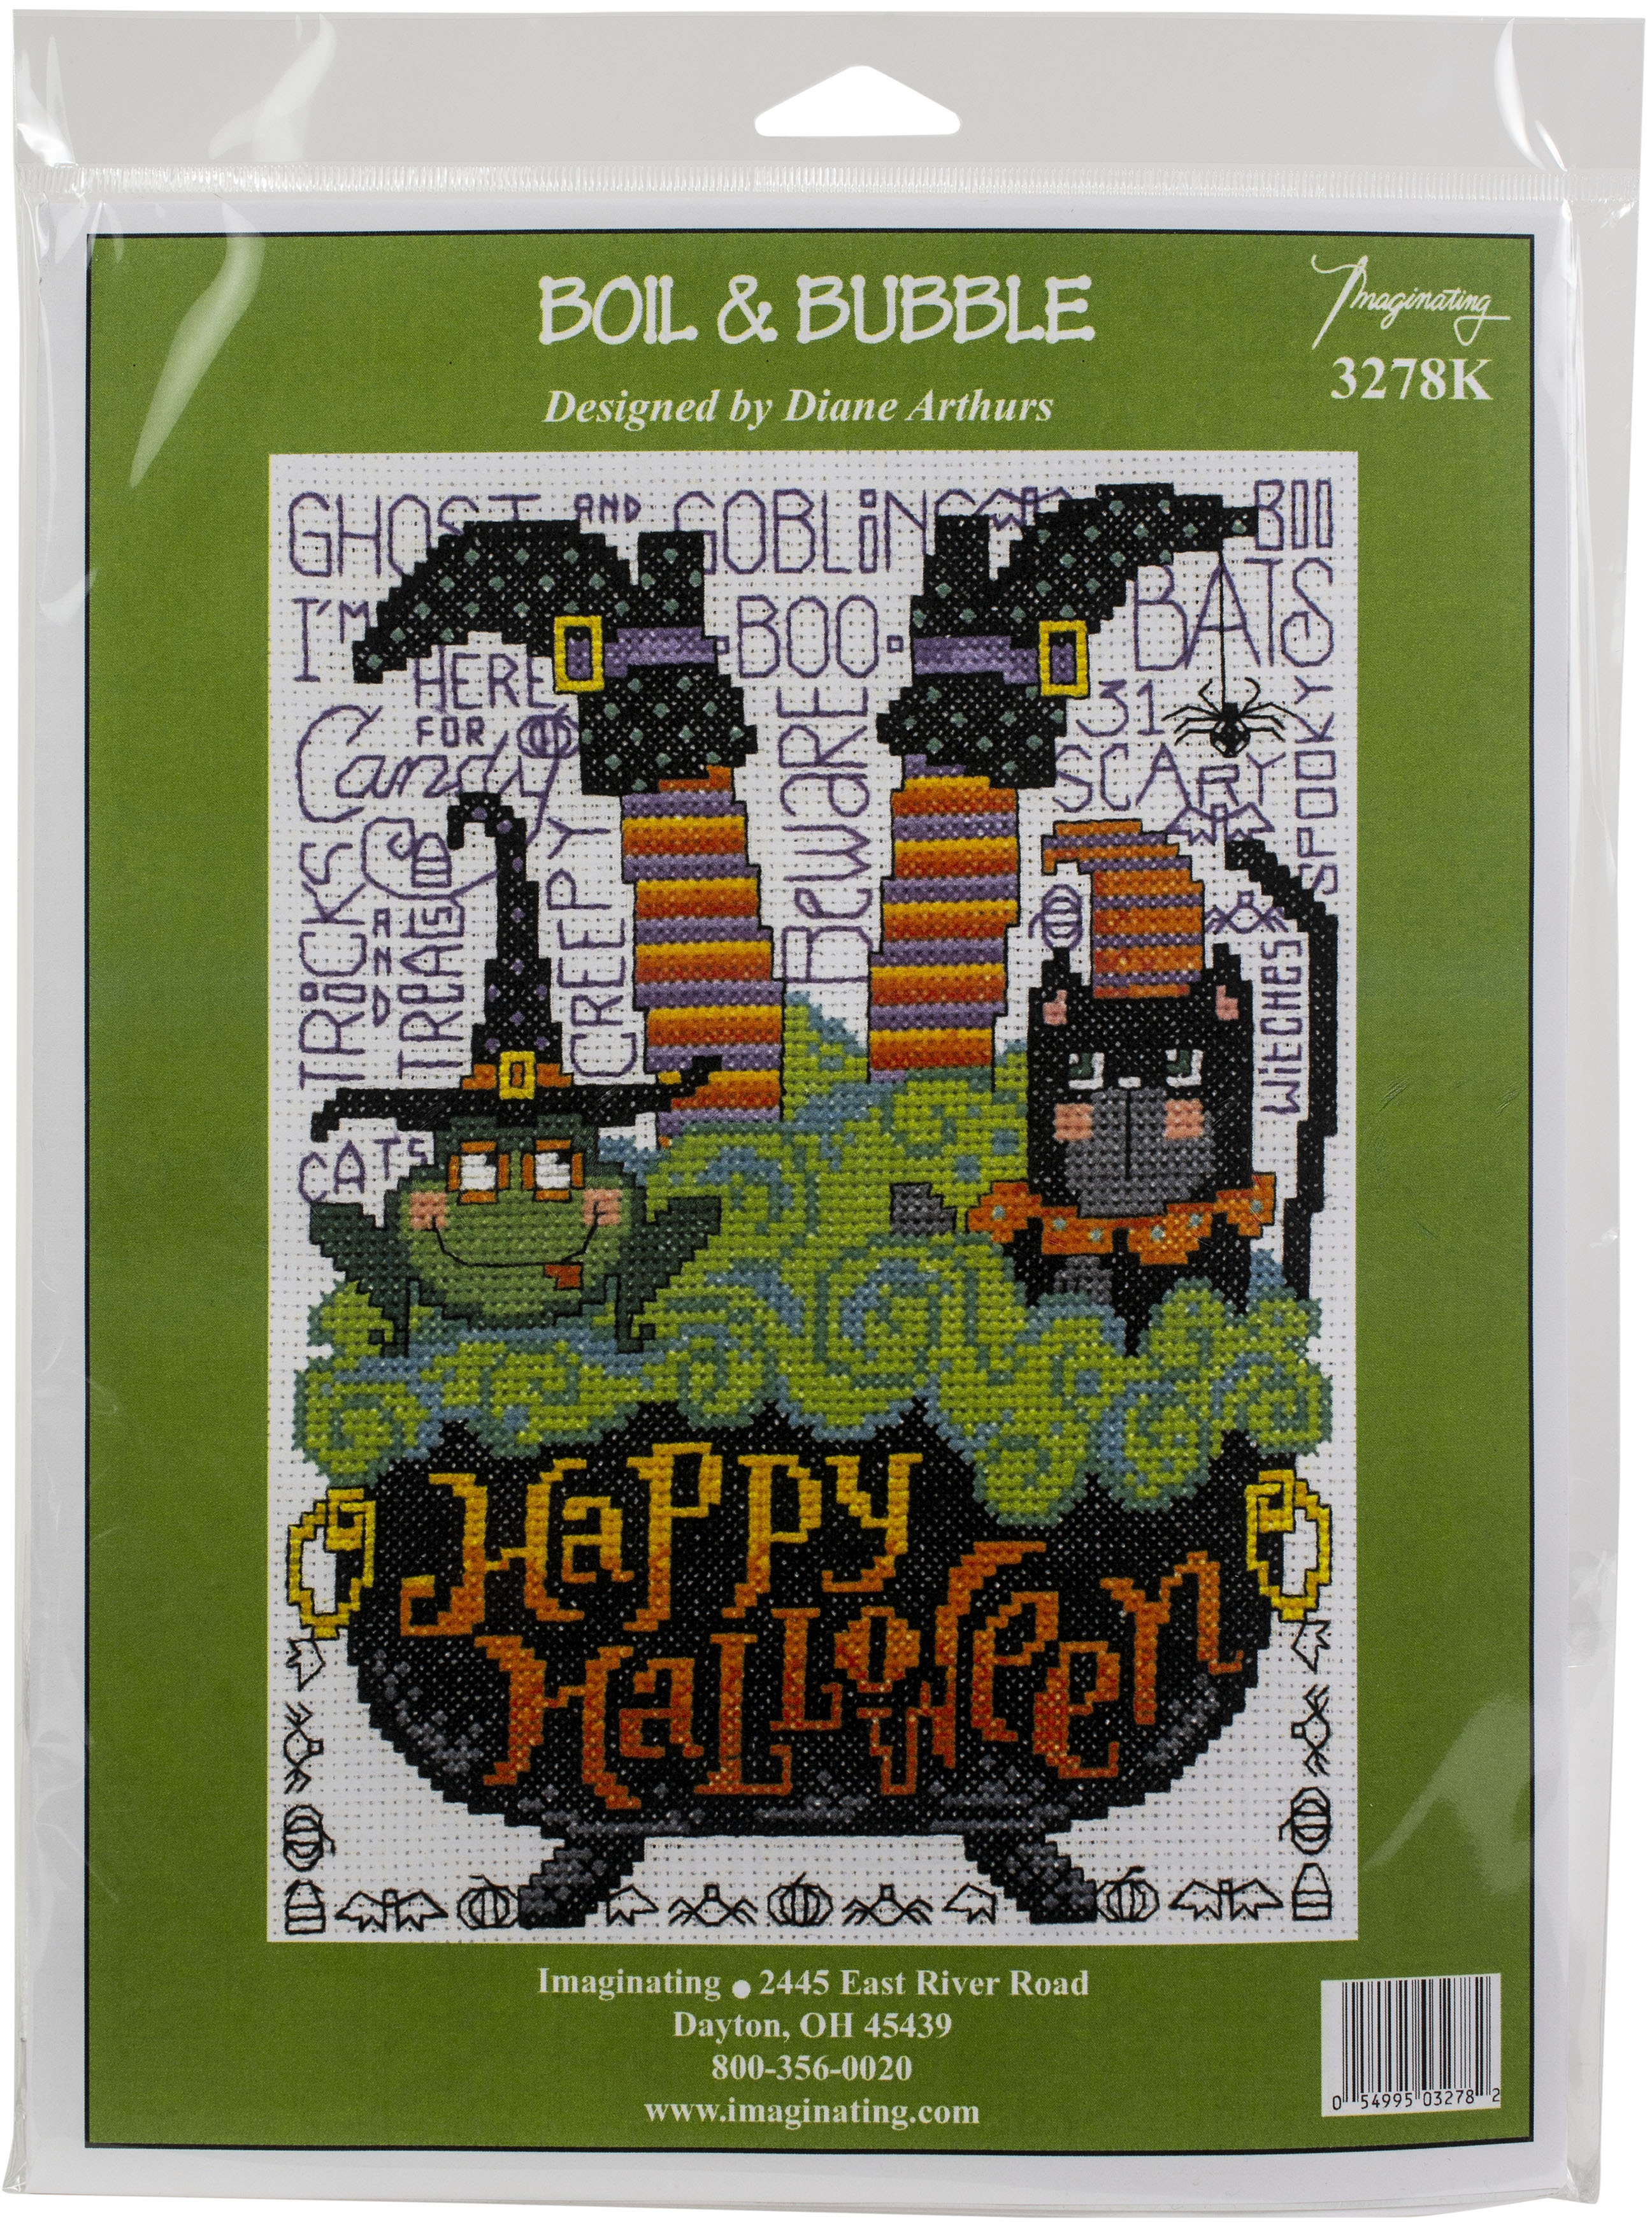 Boil and Bubble Counted Cross Stitch Kit by Imaginating Cross Stitch